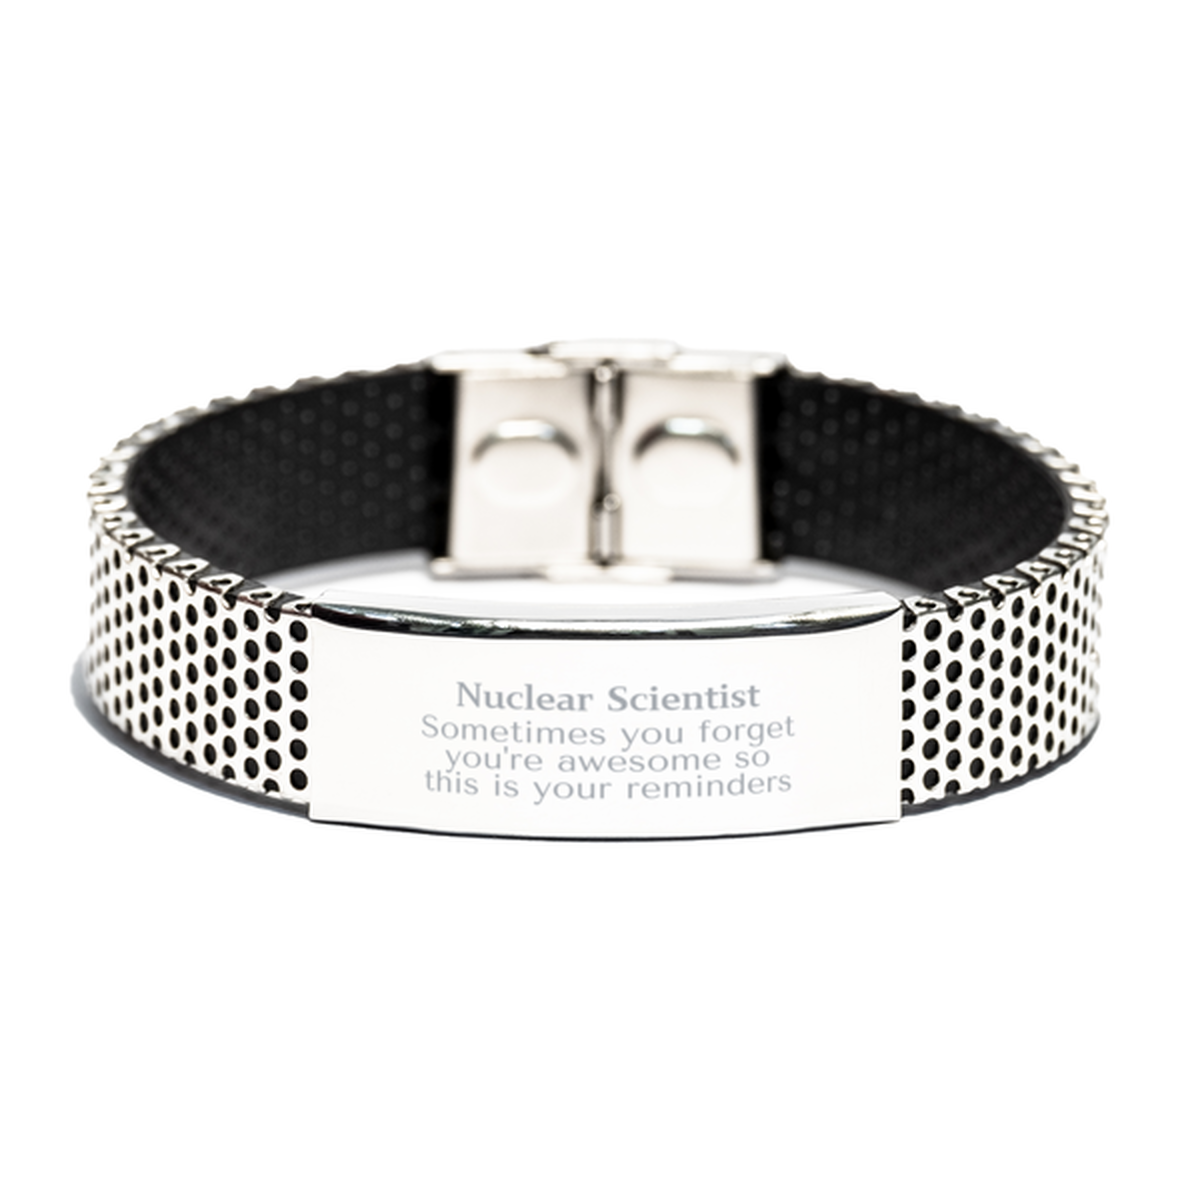 Sentimental Nuclear Scientist Stainless Steel Bracelet, Nuclear Scientist Sometimes you forget you're awesome so this is your reminders, Graduation Christmas Birthday Gifts for Nuclear Scientist, Men, Women, Coworkers